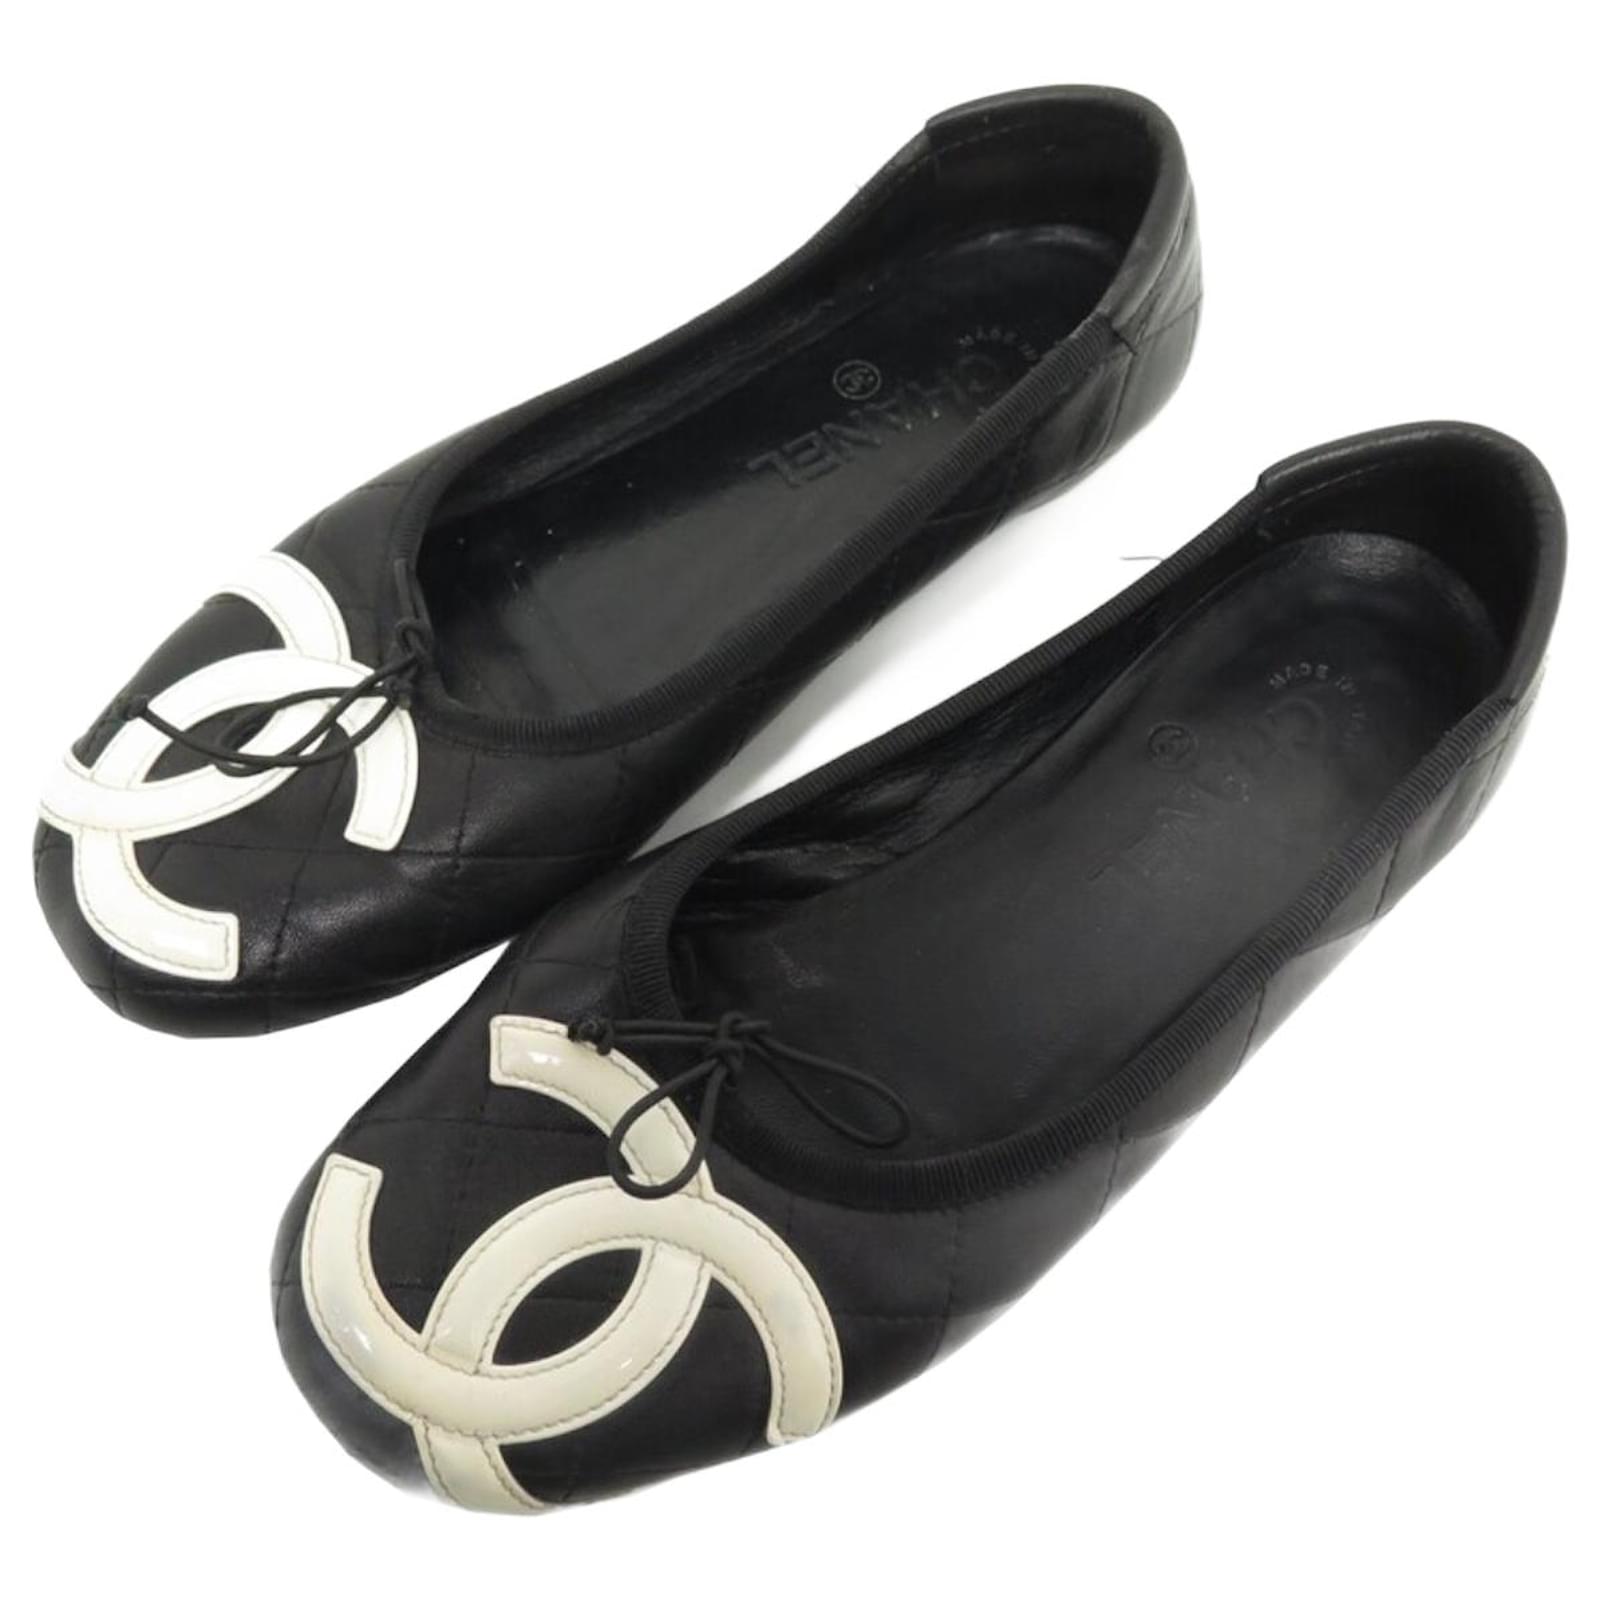 CHANEL SHOES BALLERINAS CAMBON G24712 38 LOGO CC BLACK QUILTED LEATHER